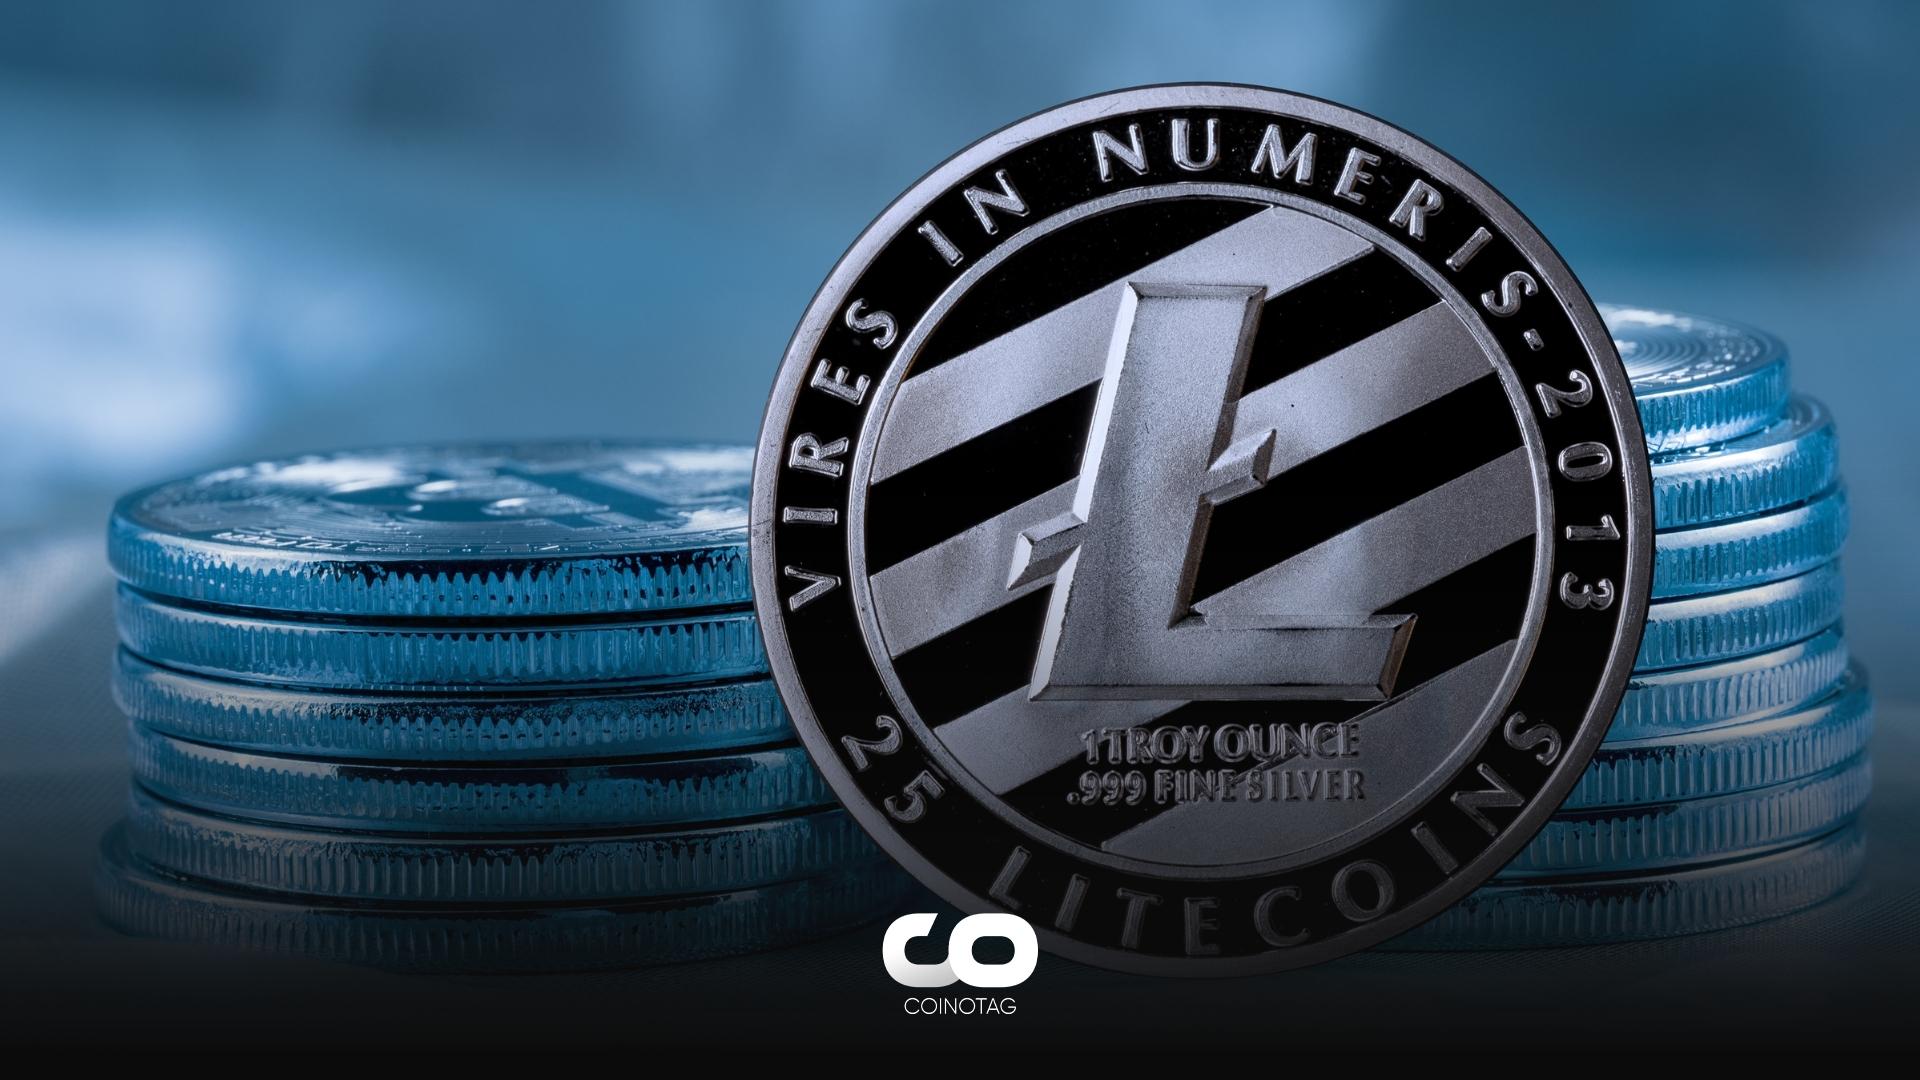 Litecoin (LTC) Awaits This Critical Level to Buy the Dips! July 4th LTC Analysis